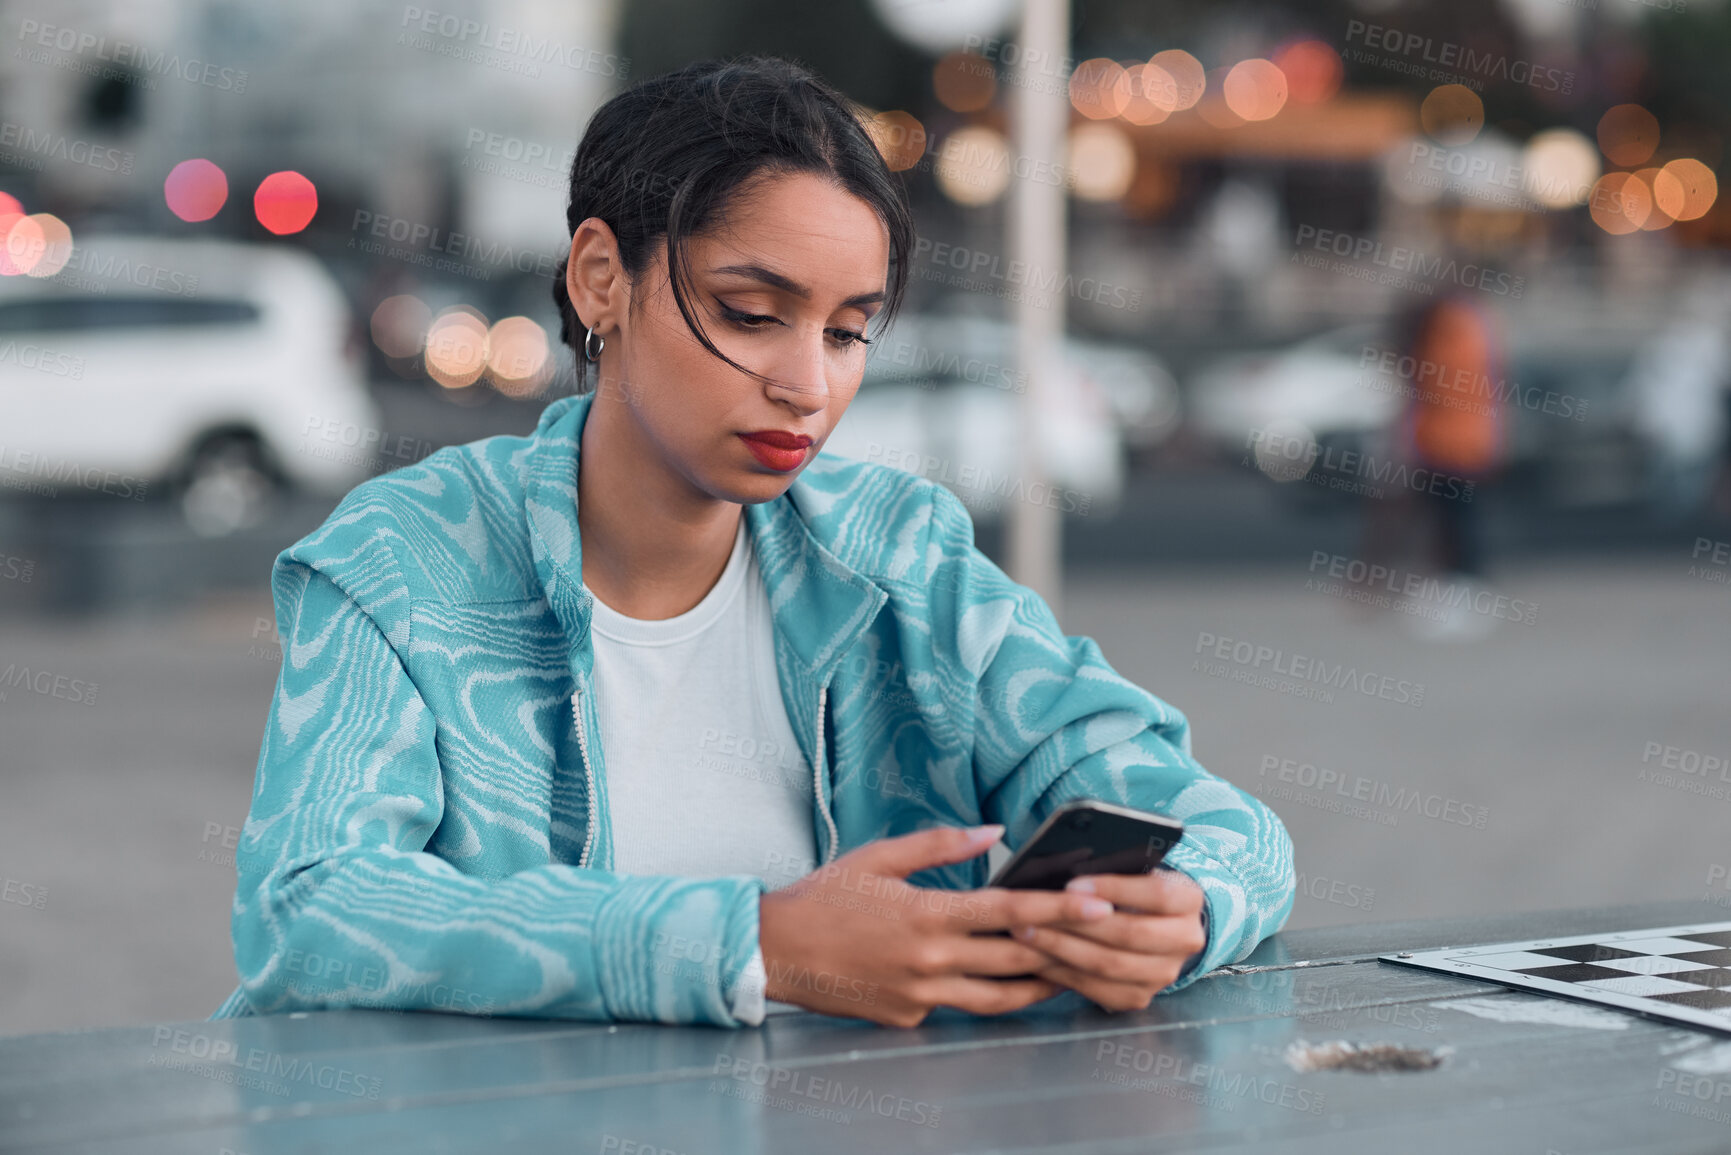 Buy stock photo Sad, depressed and stressed female with mental health problem texting on phone while sitting at outdoor cafe. Young woman getting negative response or bad news while chatting or browsing social media